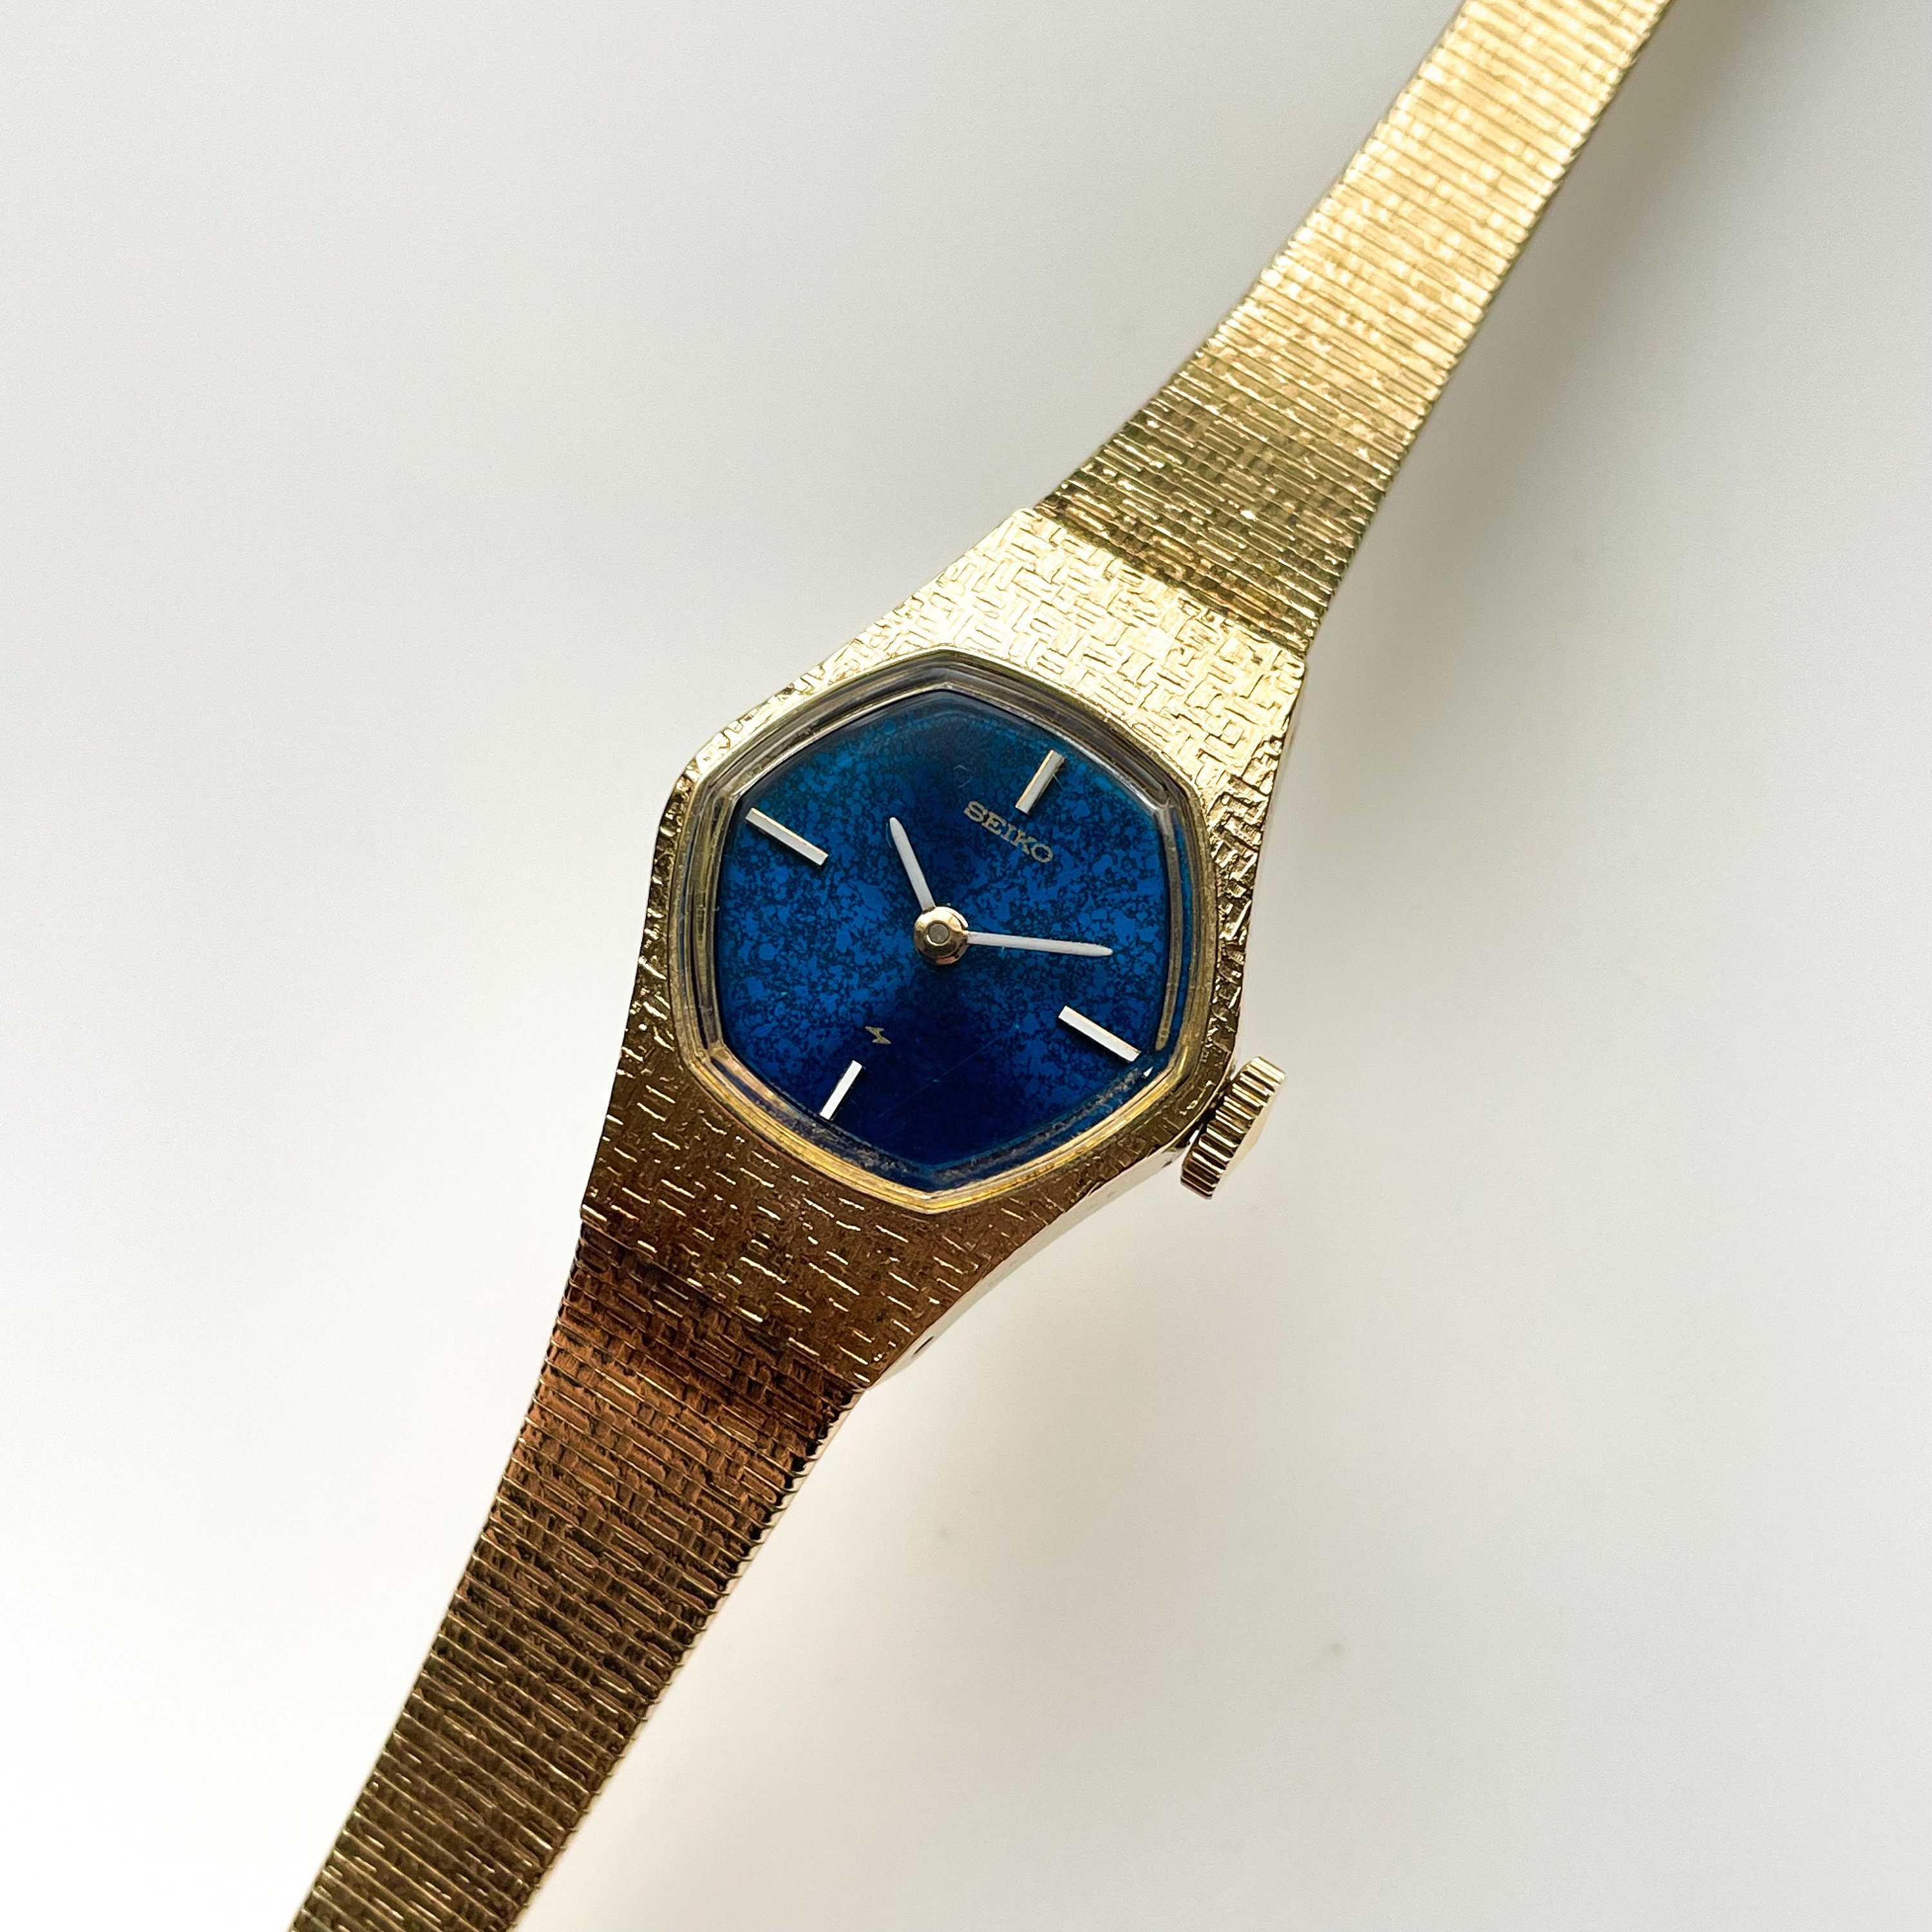 1974 Gold-tone Seiko Mechanical Watch With Blue Dial - Etsy